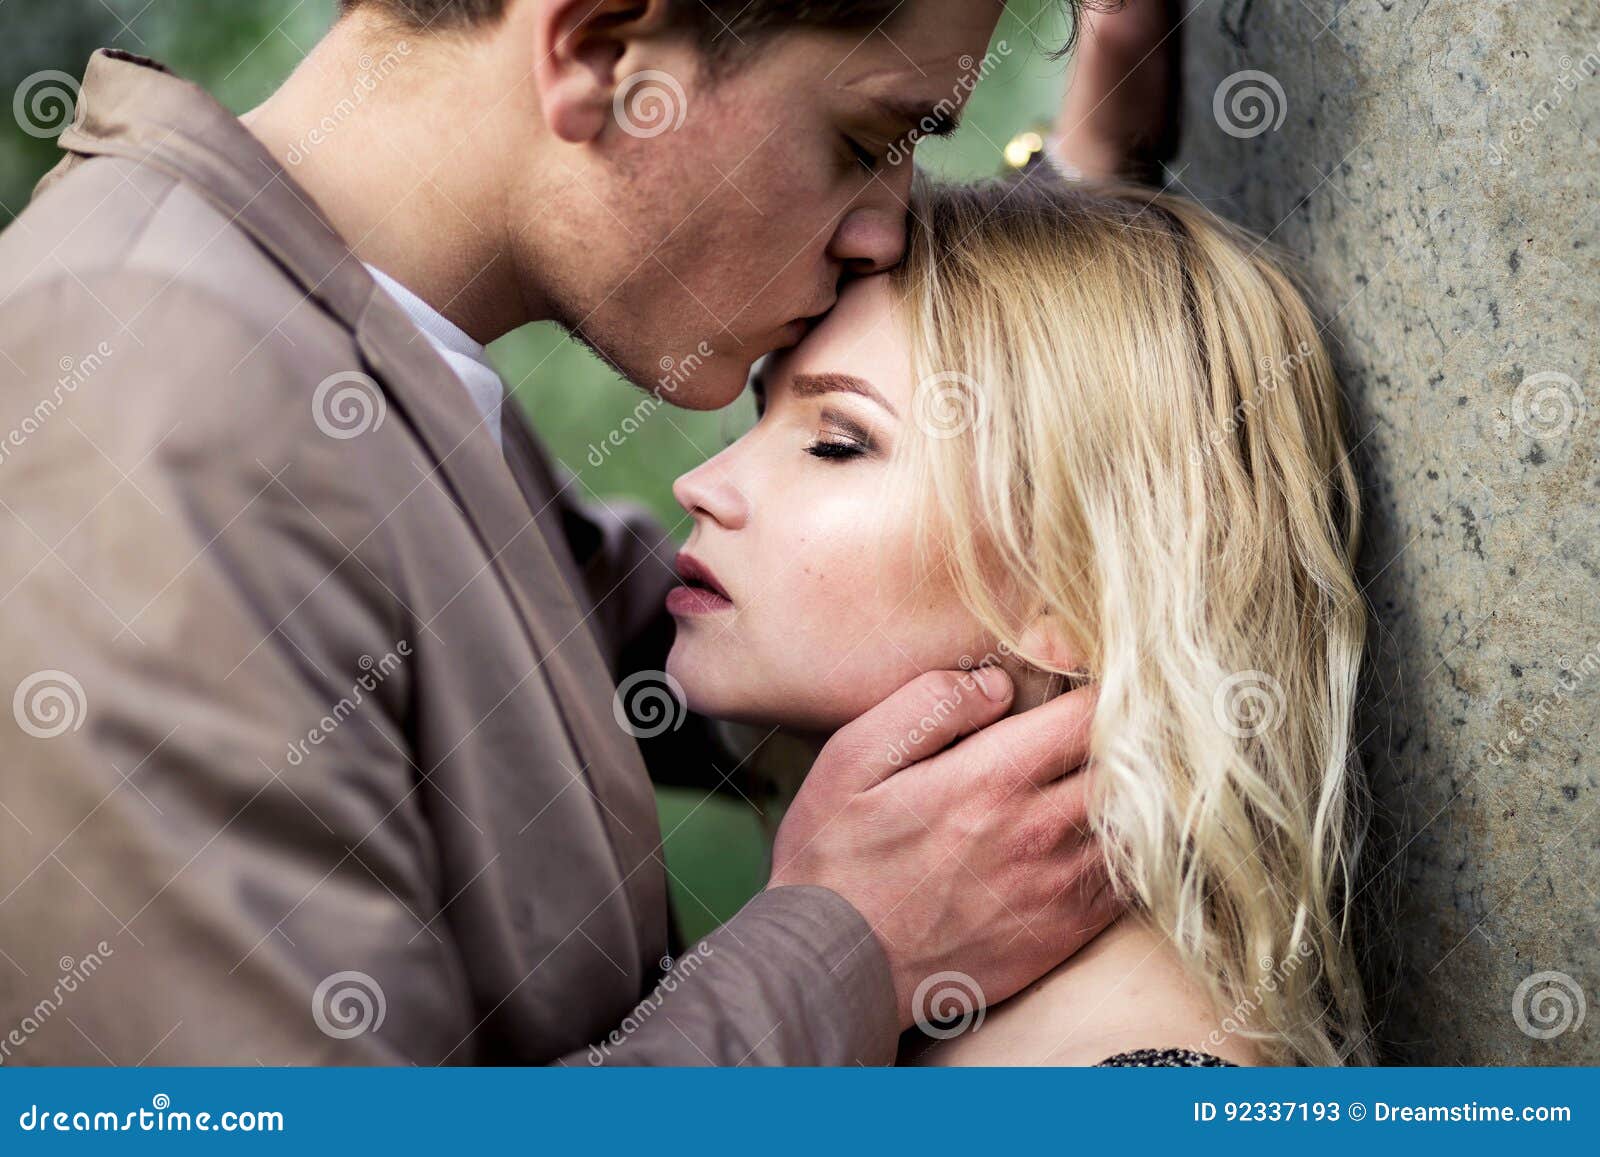 Man Kissing Womans Forehead Stock Image Image Of Forehead People